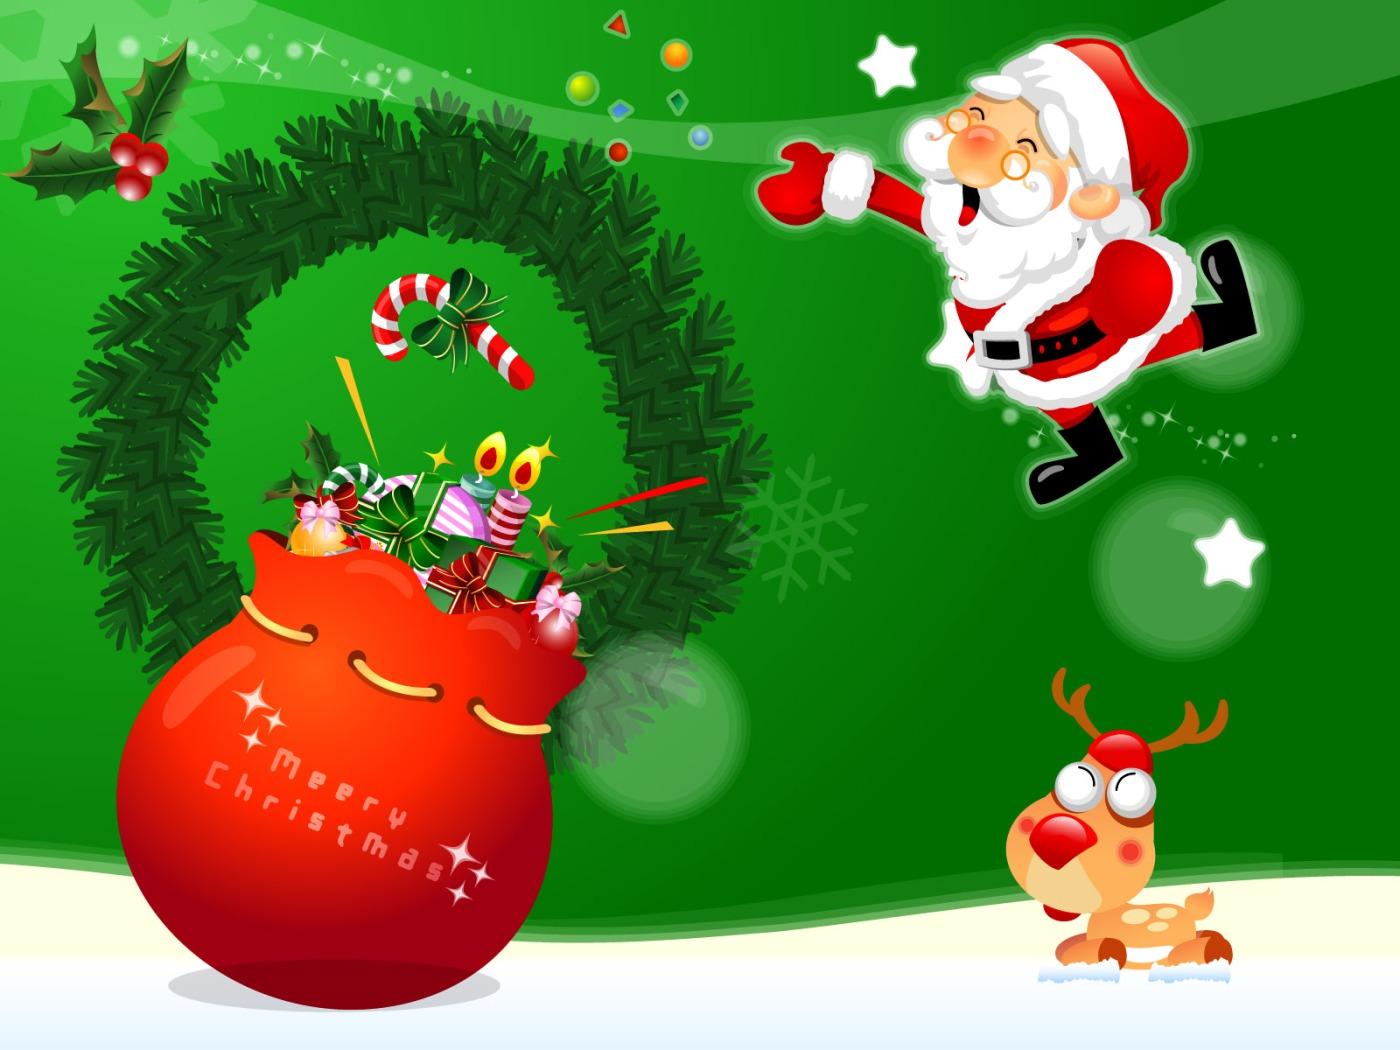 Santa Claus and Silly Reindeer widescreen wallpaper. Wide